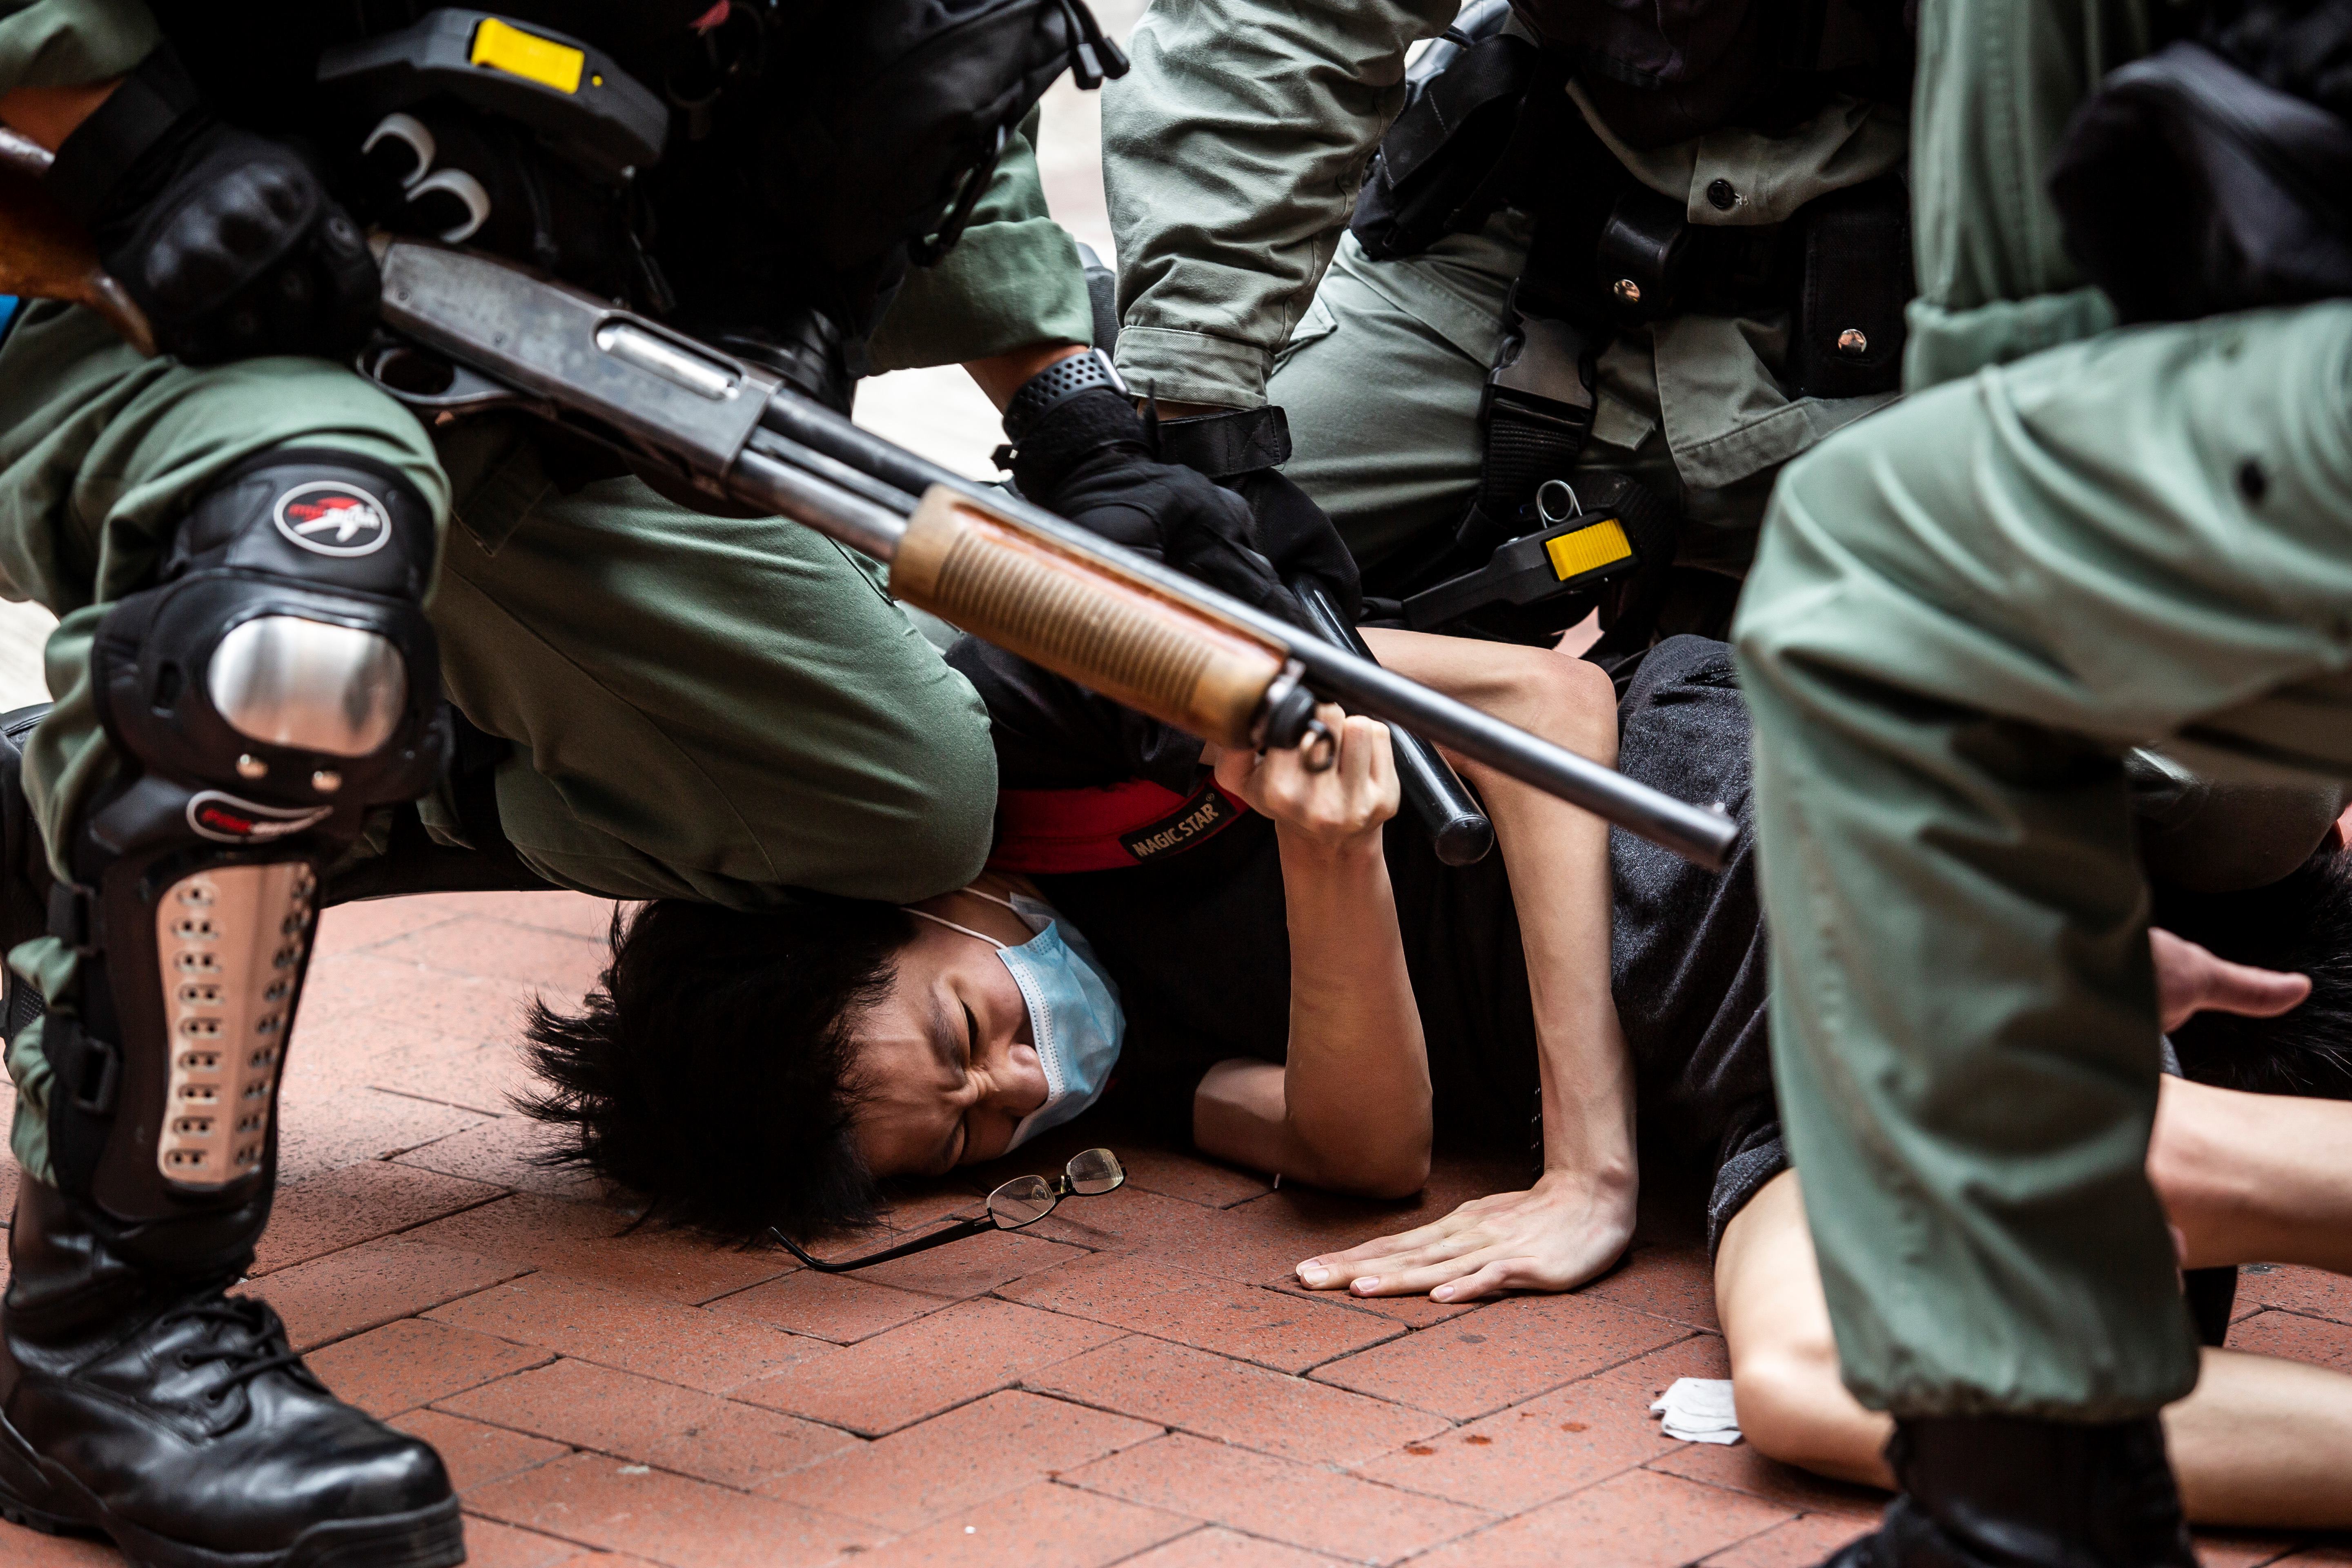 Pro-democracy protesters are arrested by police in the Causeway Bay district of Hong Kong on 24 May 2020